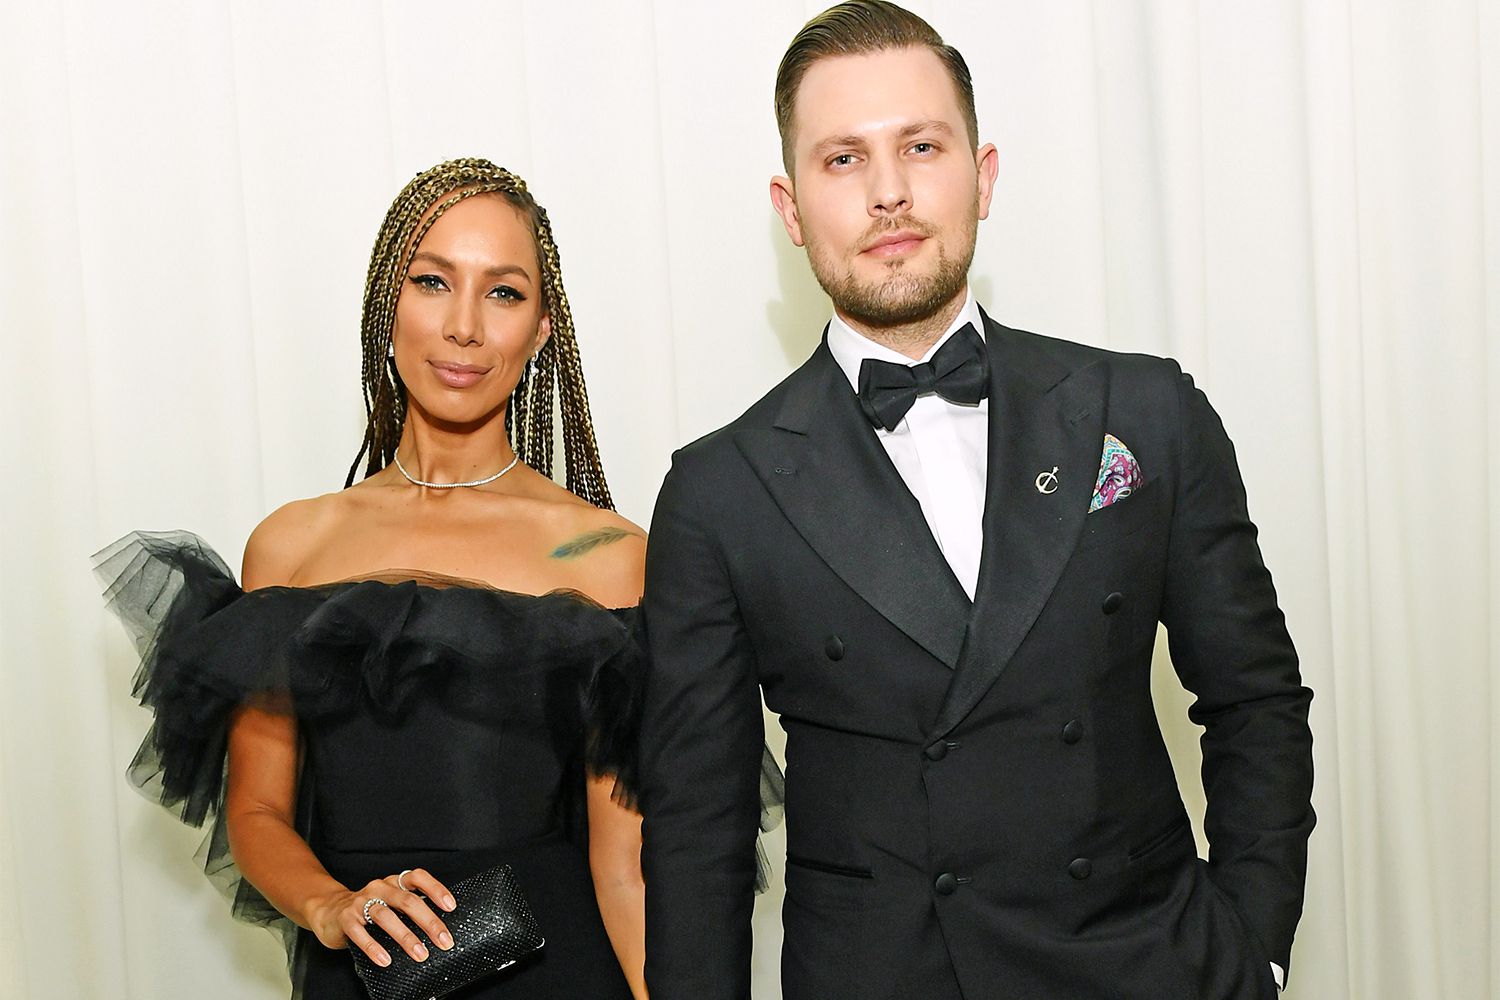 WEST HOLLYWOOD, CALIFORNIA - FEBRUARY 09: Leona Lewis and Dennis Jauch attend the 28th Annual Elton John AIDS Foundation Academy Awards Viewing Party sponsored by IMDb, Neuro Drinks and Walmart on February 09, 2020 in West Hollywood, California. (Photo by Mike Coppola/Getty Images)